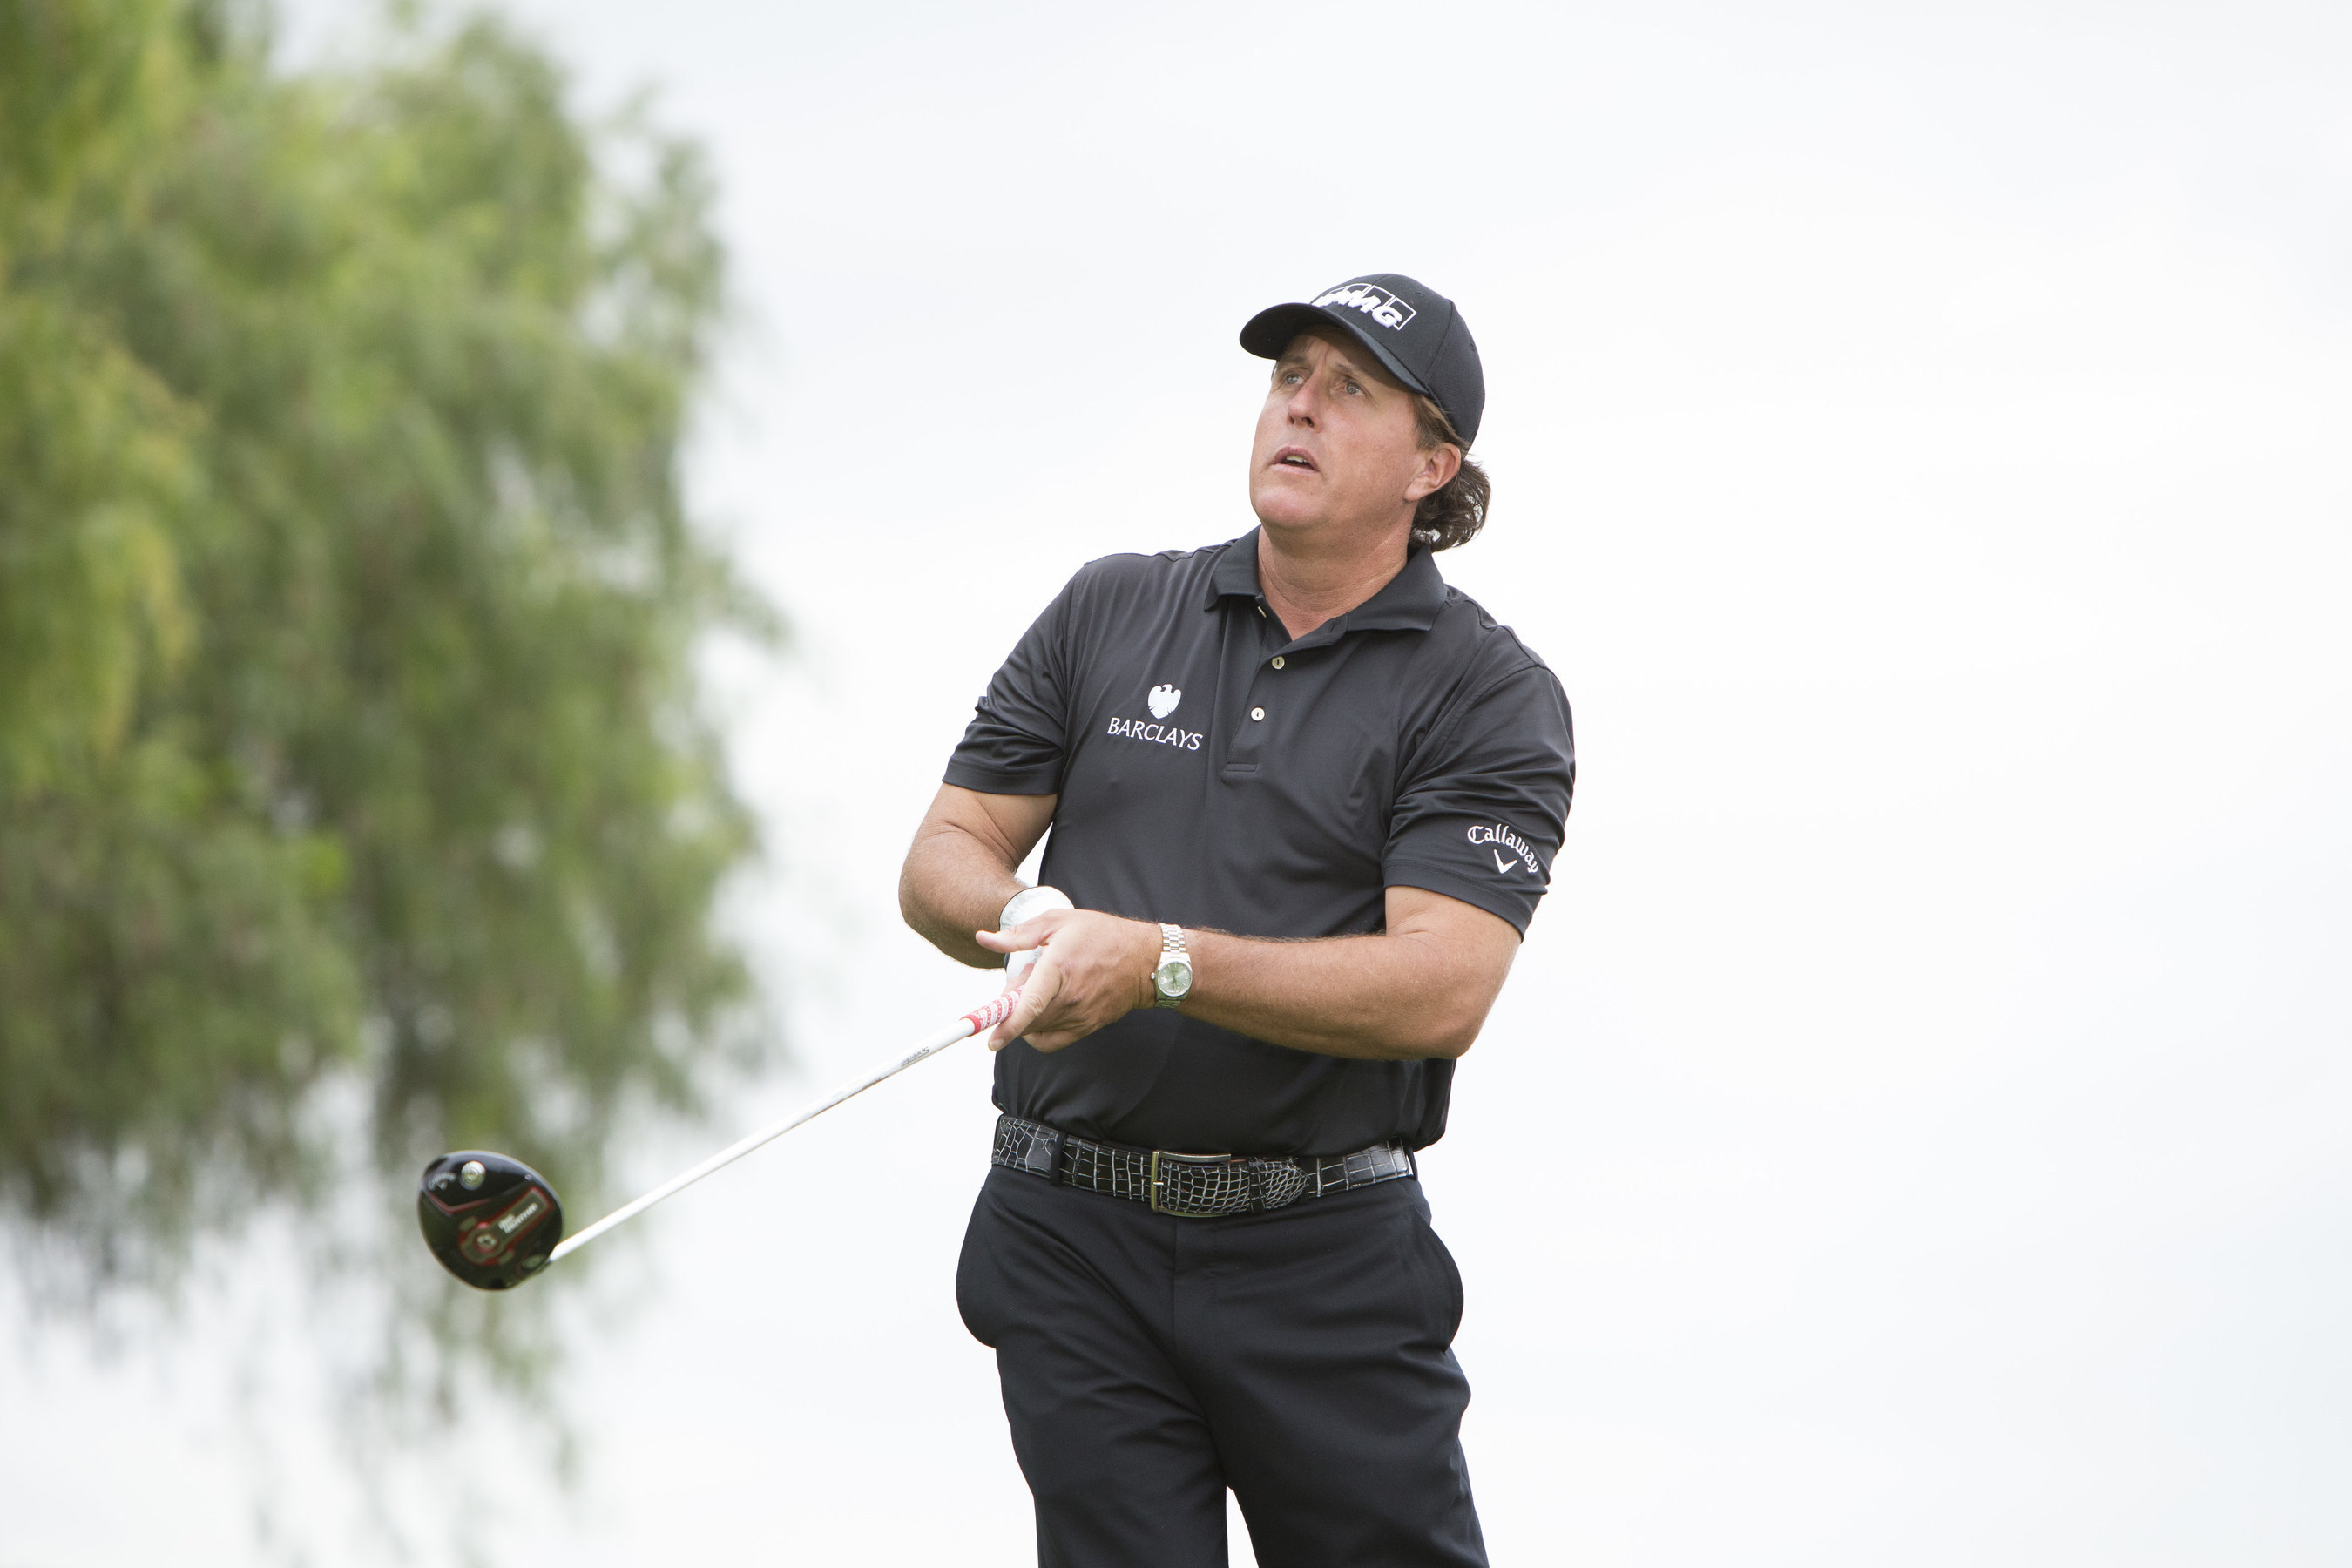 Phil Mickelson tees off with Callaway's new Big Bertha Alpha 815 Driver, which will be available nationwide on November 13, 2014. Callaway today announced that it extended its longtime partnership with the five-time major championship winner.